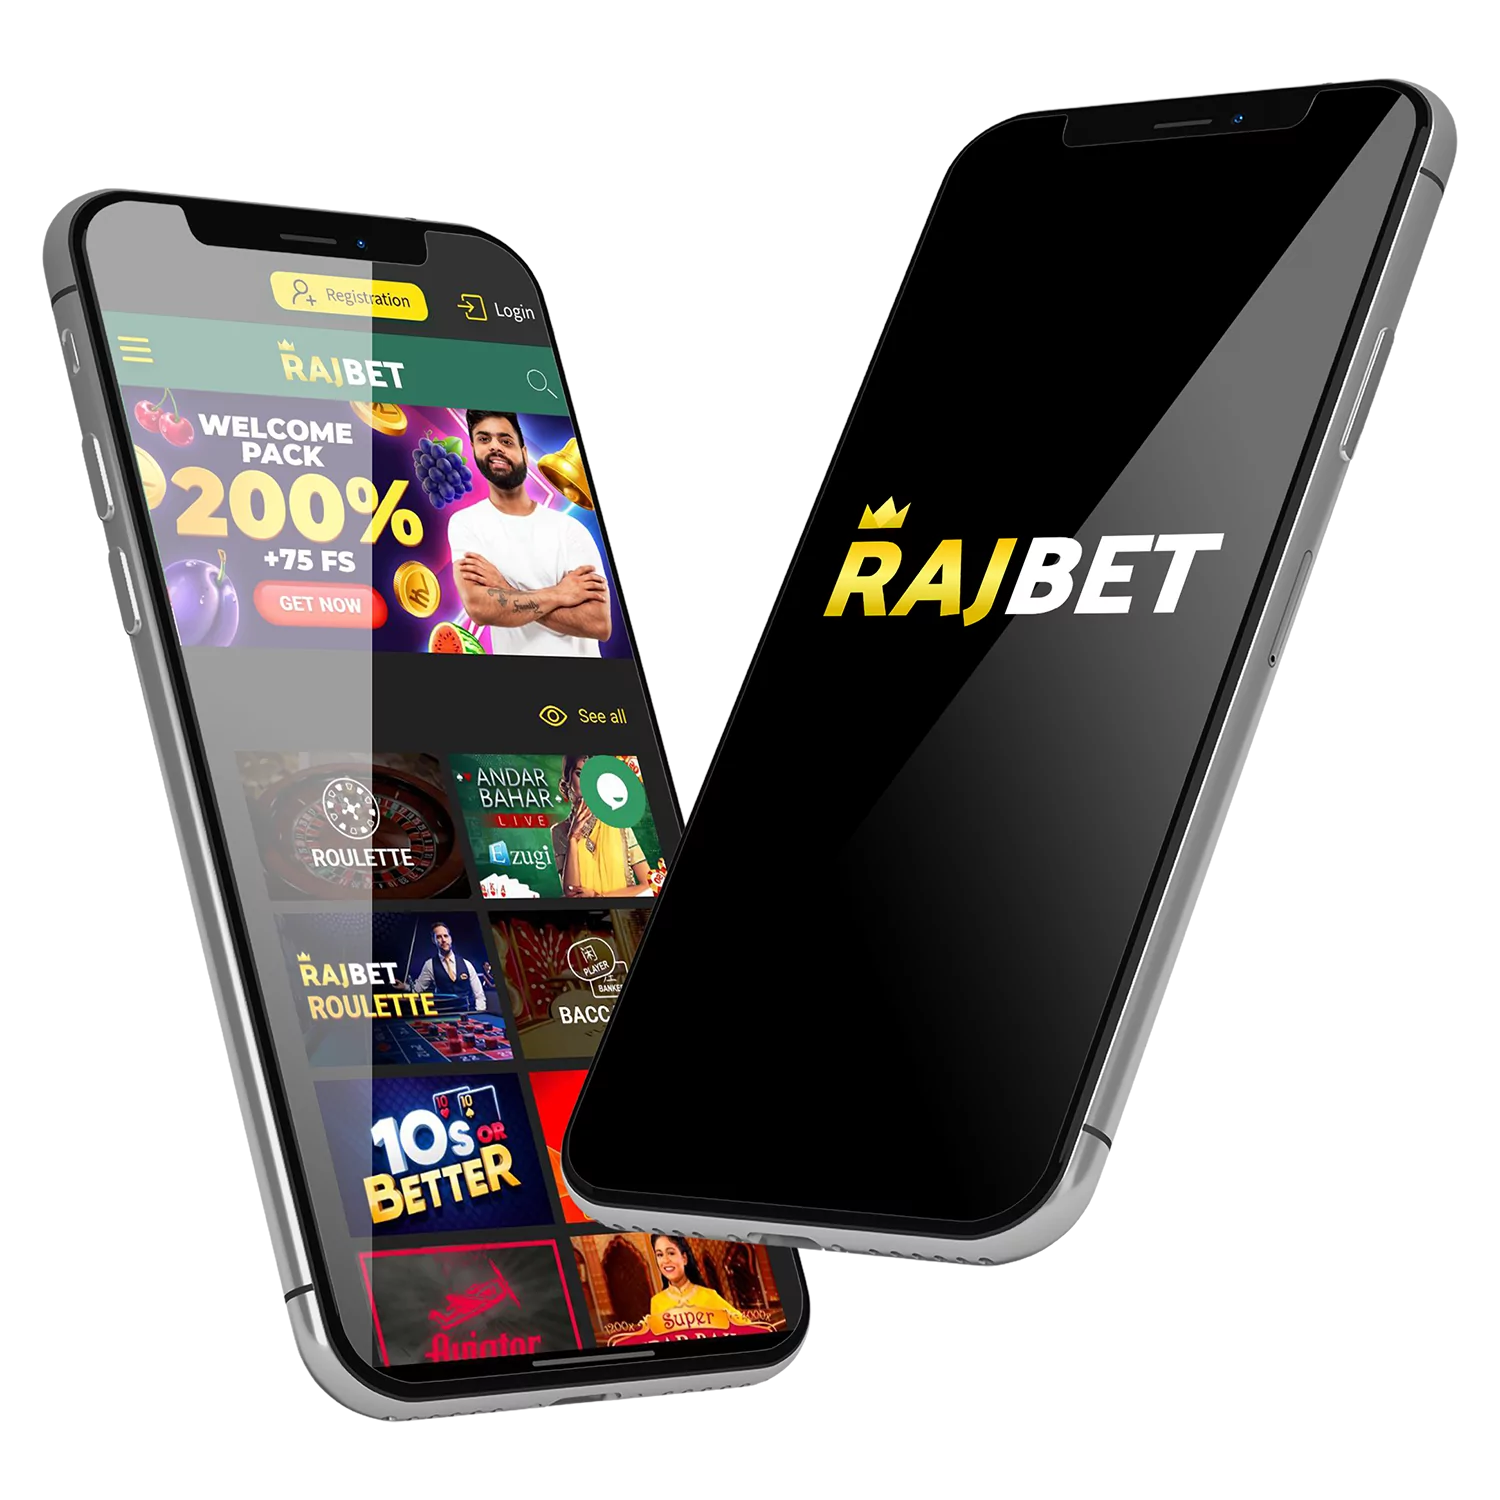 The Rajbet app is available for Android.